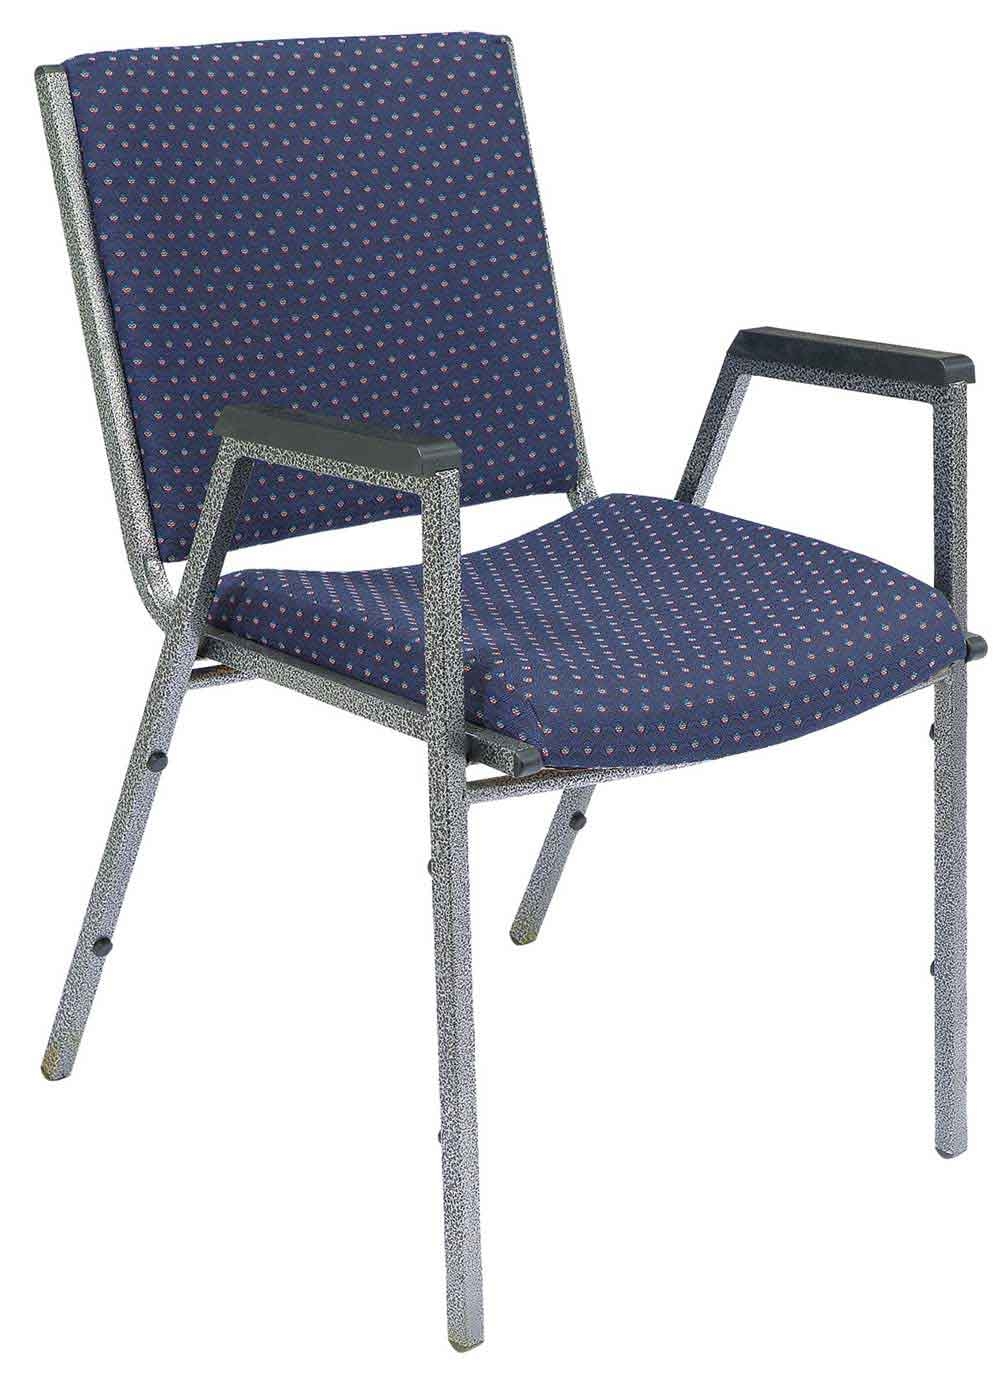 Lightweight folding chairs for extra pleasure 2